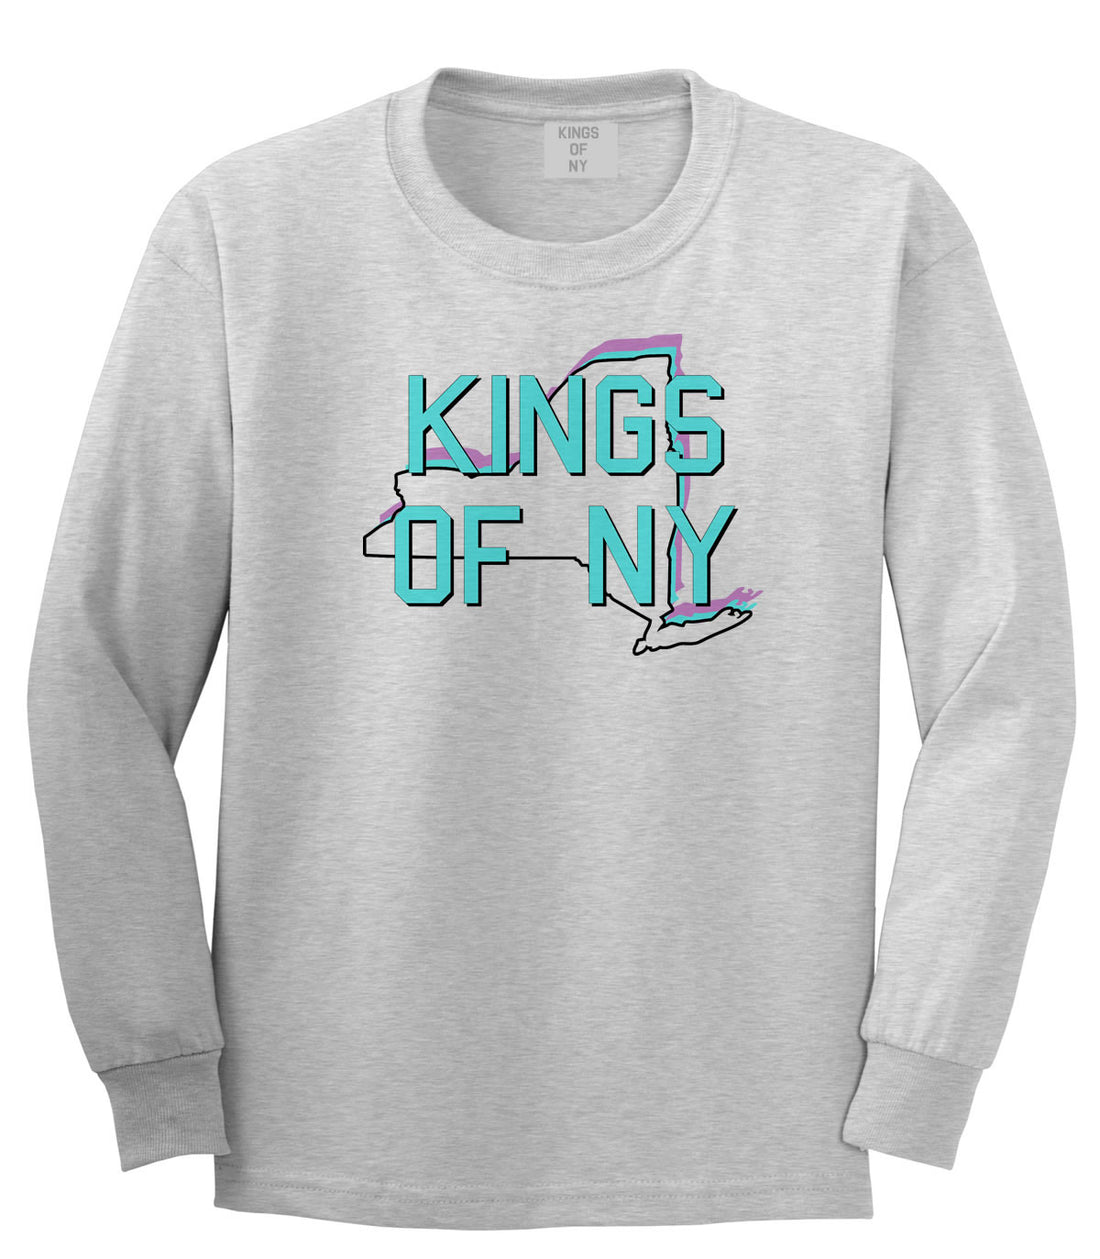 New York State Outline Long Sleeve T-Shirt in Grey by Kings Of NY